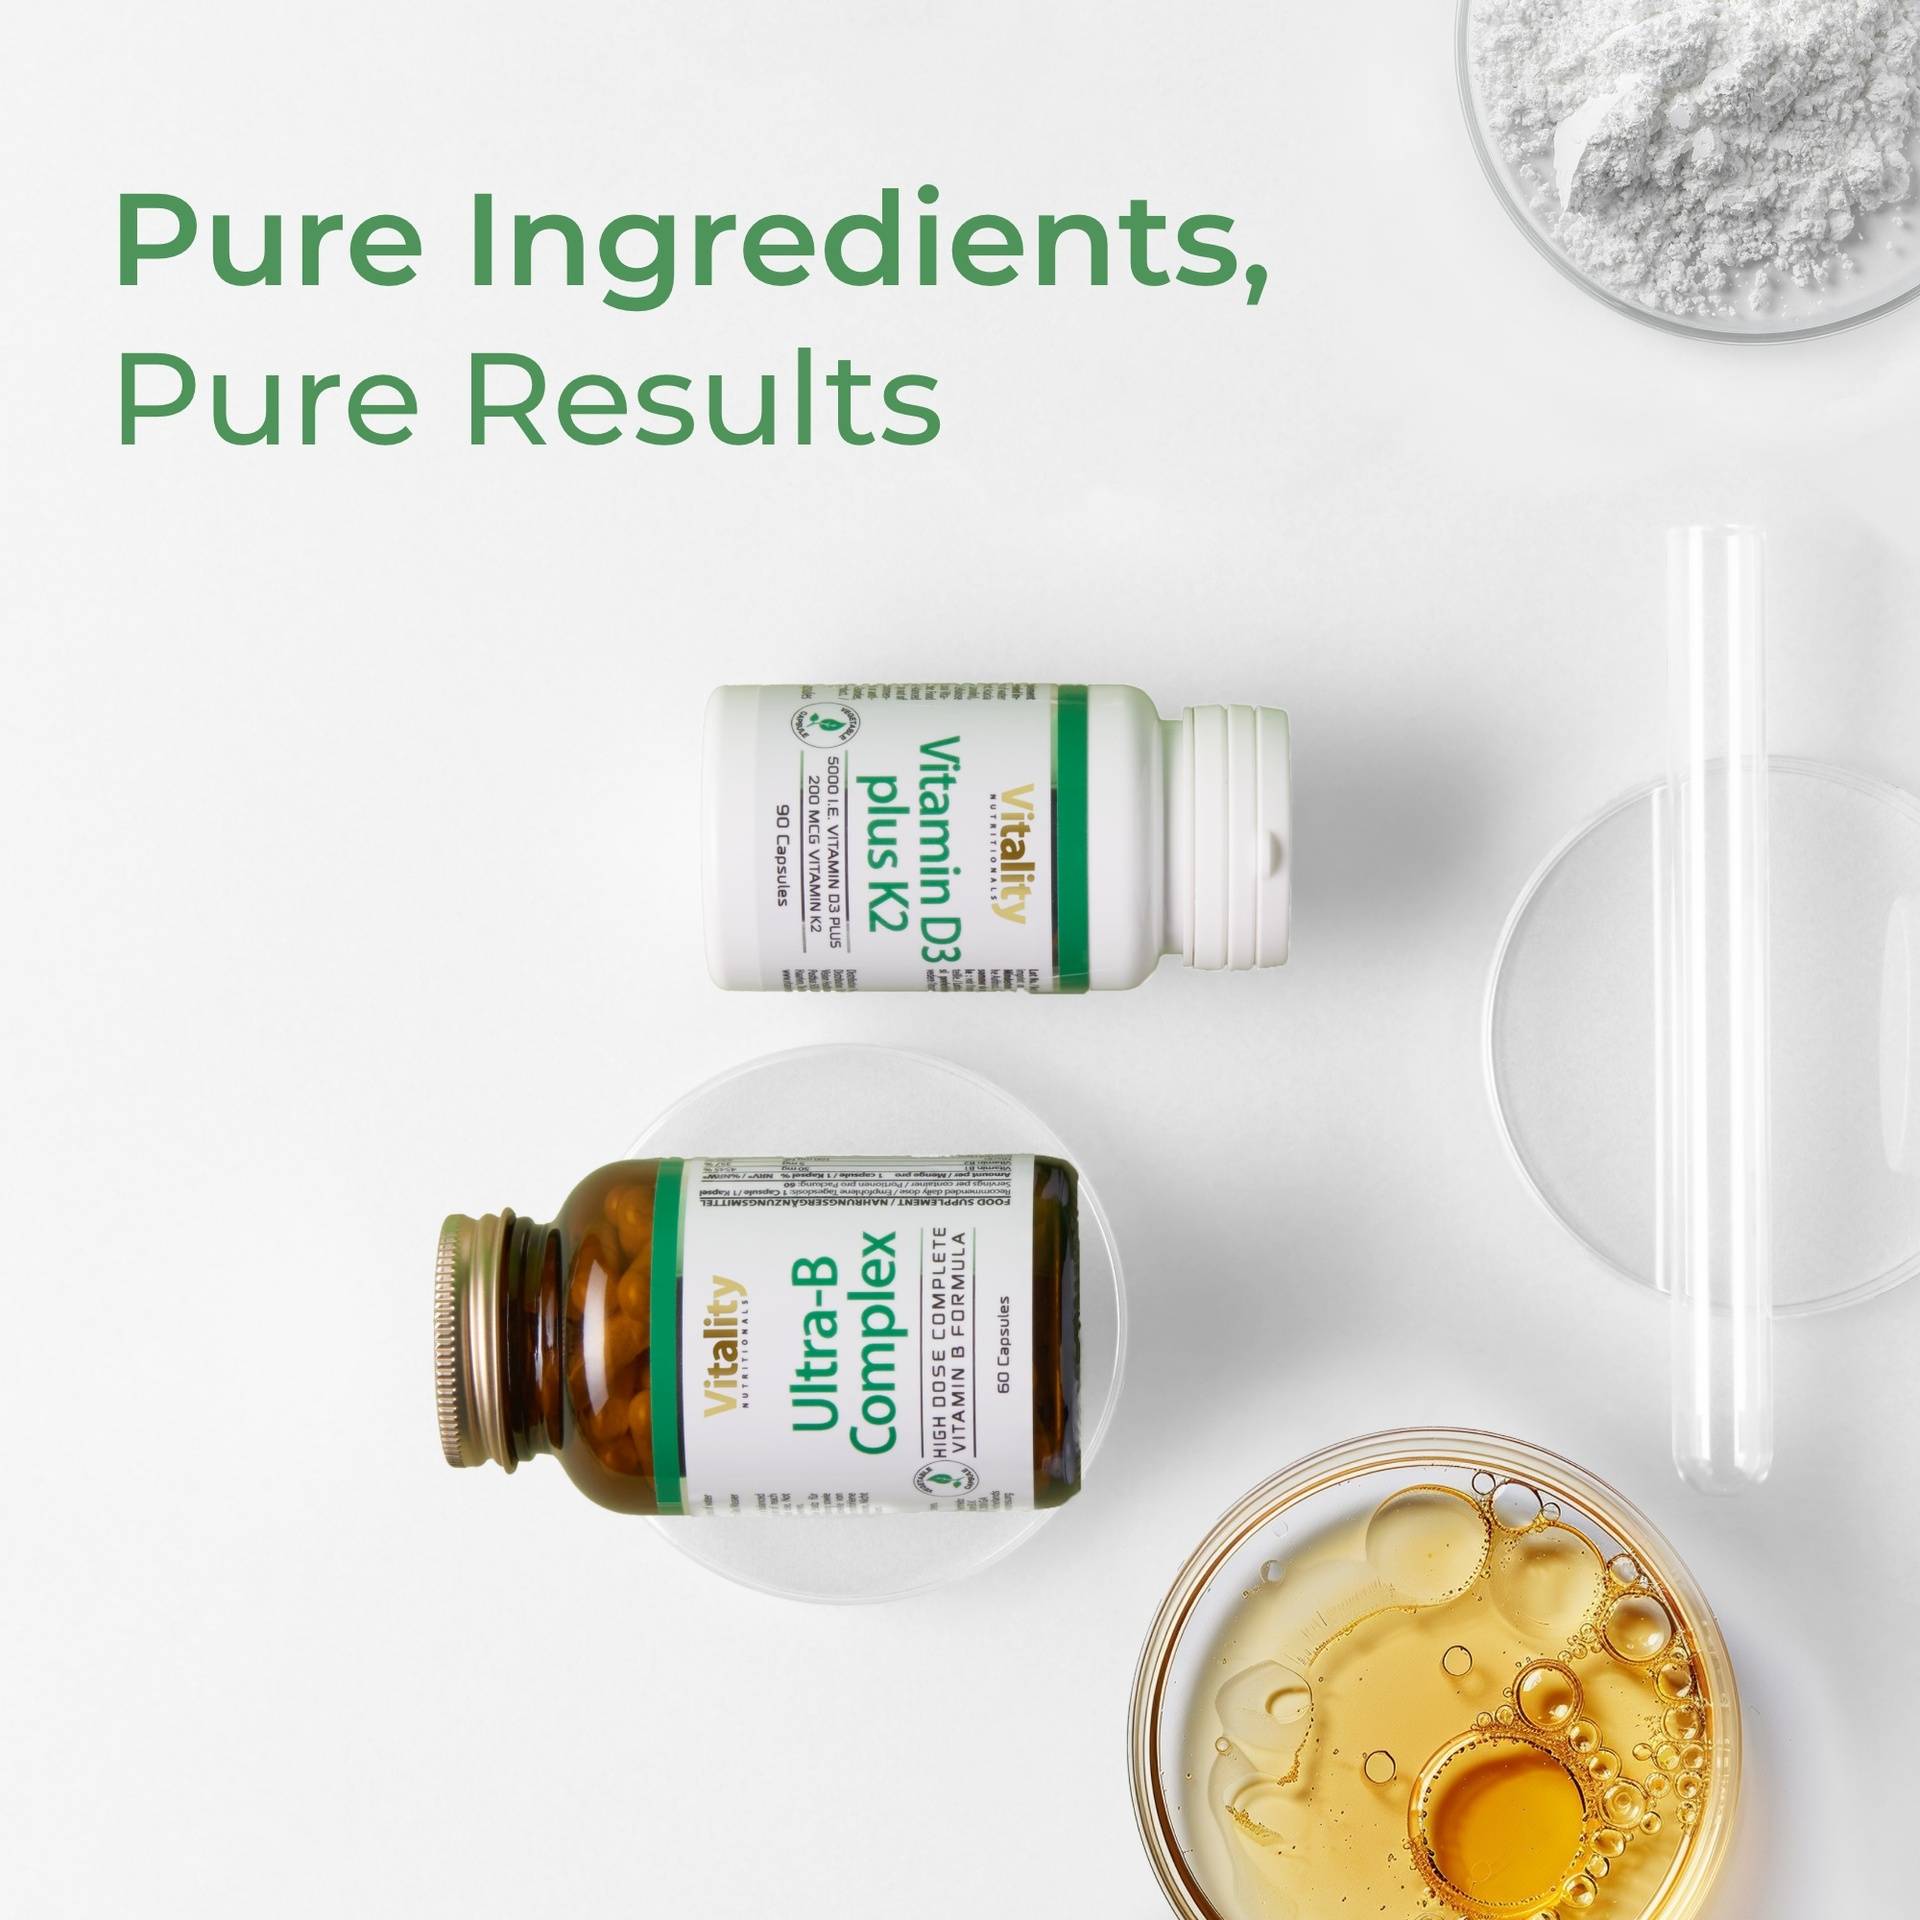 2000x2000_Pure Ingredients,Pure Results_v01_Clean-version – 4.png